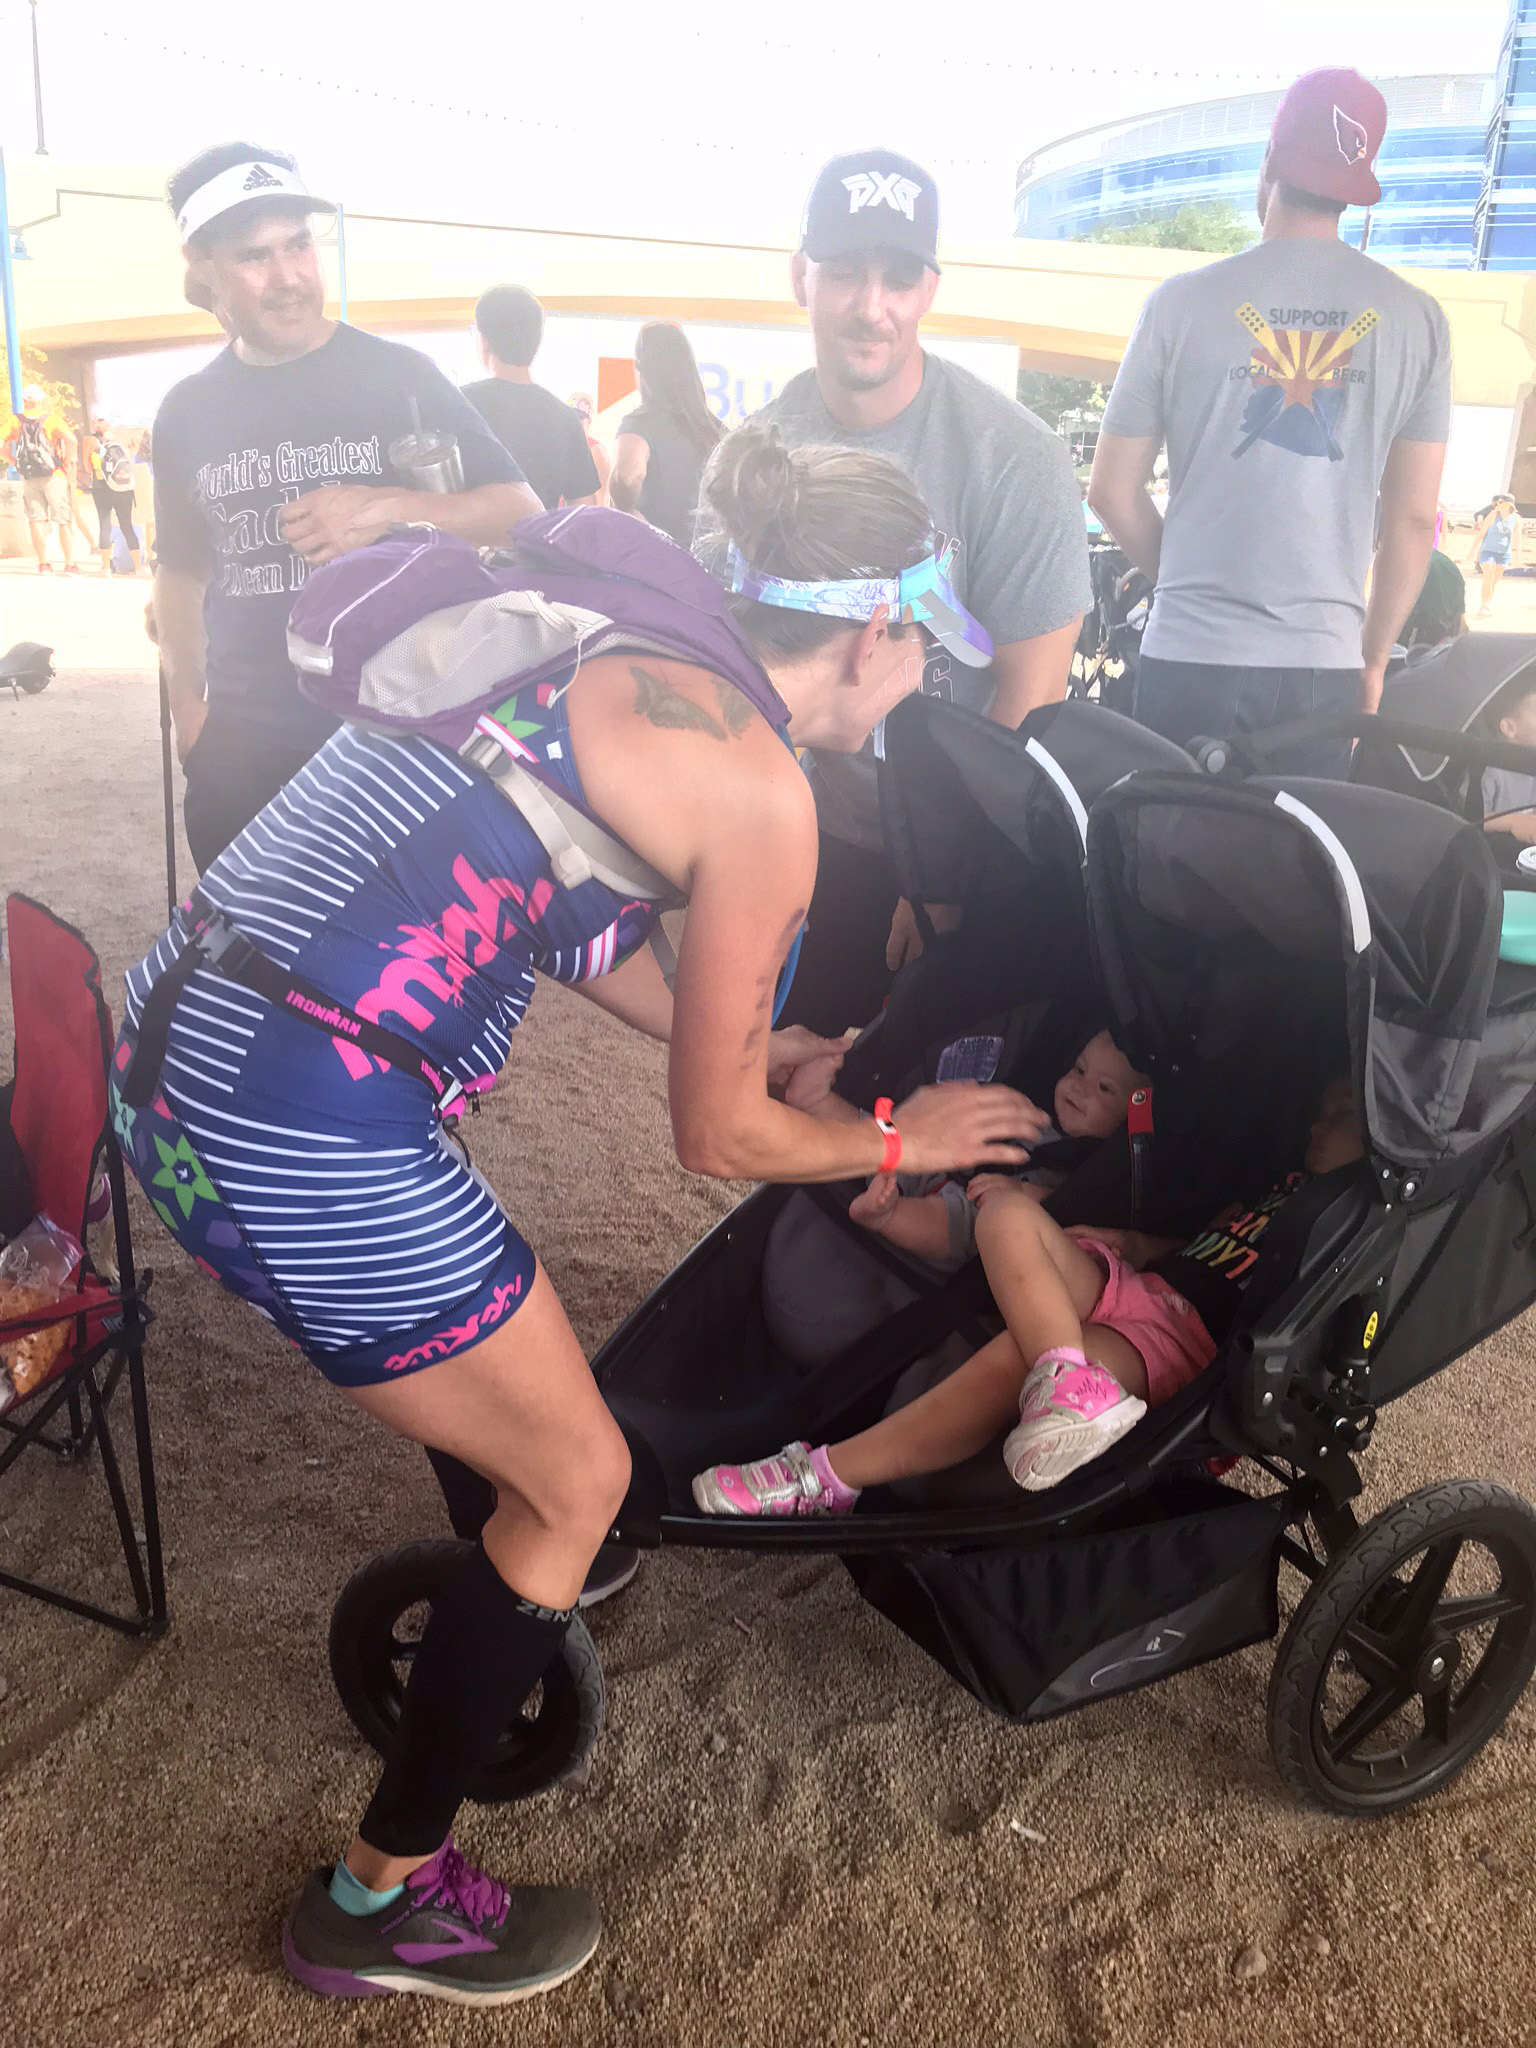 PHOTO: Jaime Sloan stops to see her children at the Ironman 70.3 in Tempe, Arizona.